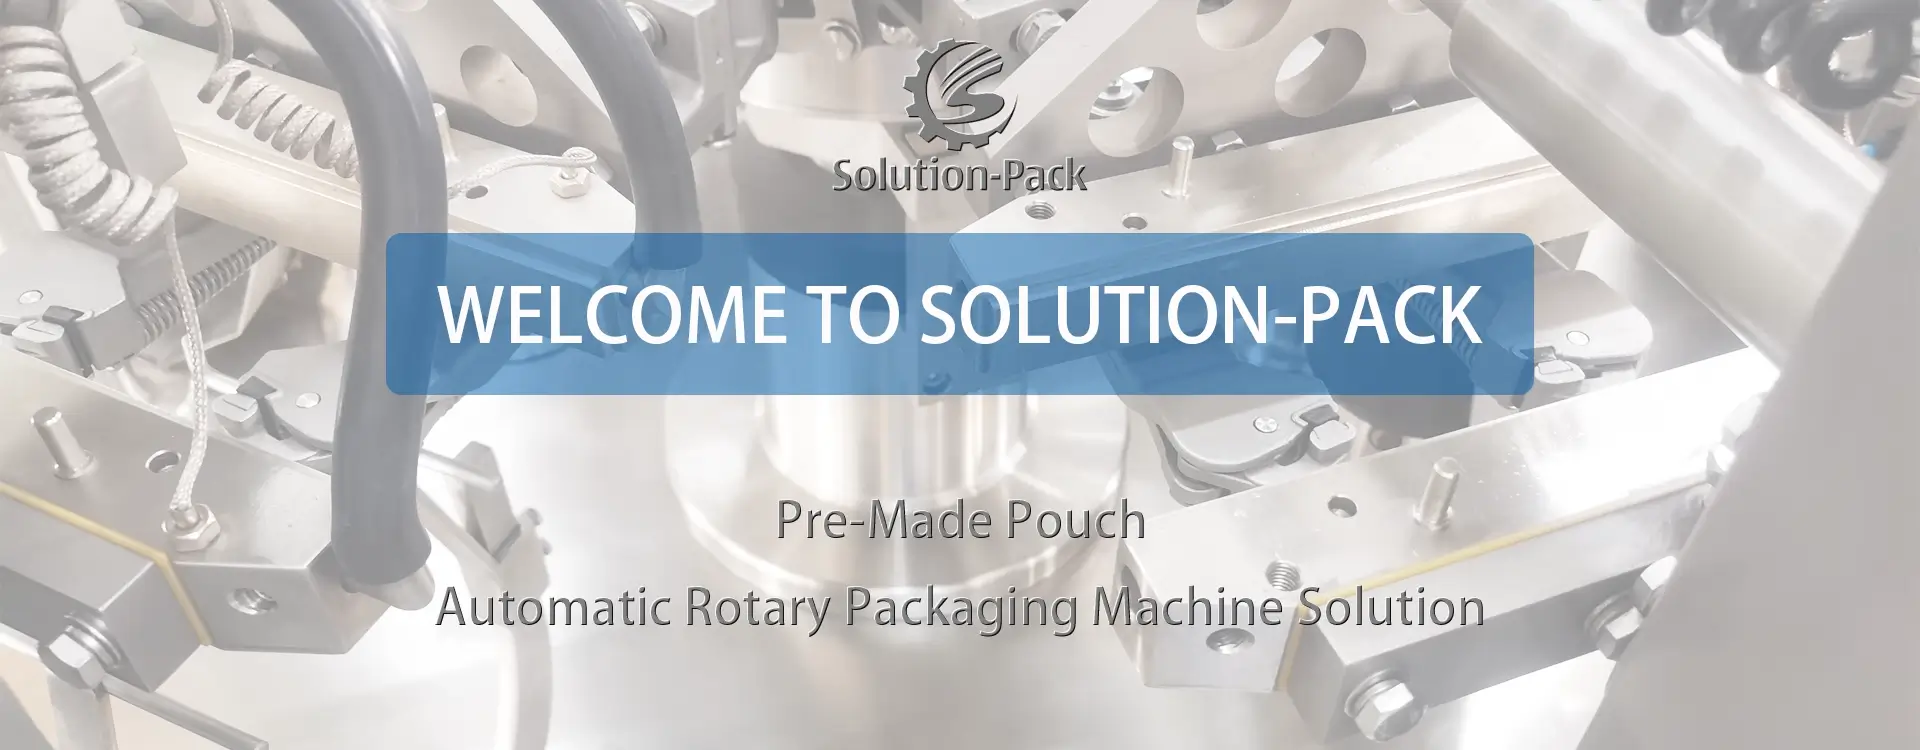 Model SP9-300P Automatic Double Filling Station Powder Rotary Packaging Machine Solution Bottom Banner Picture | Solution-Pack